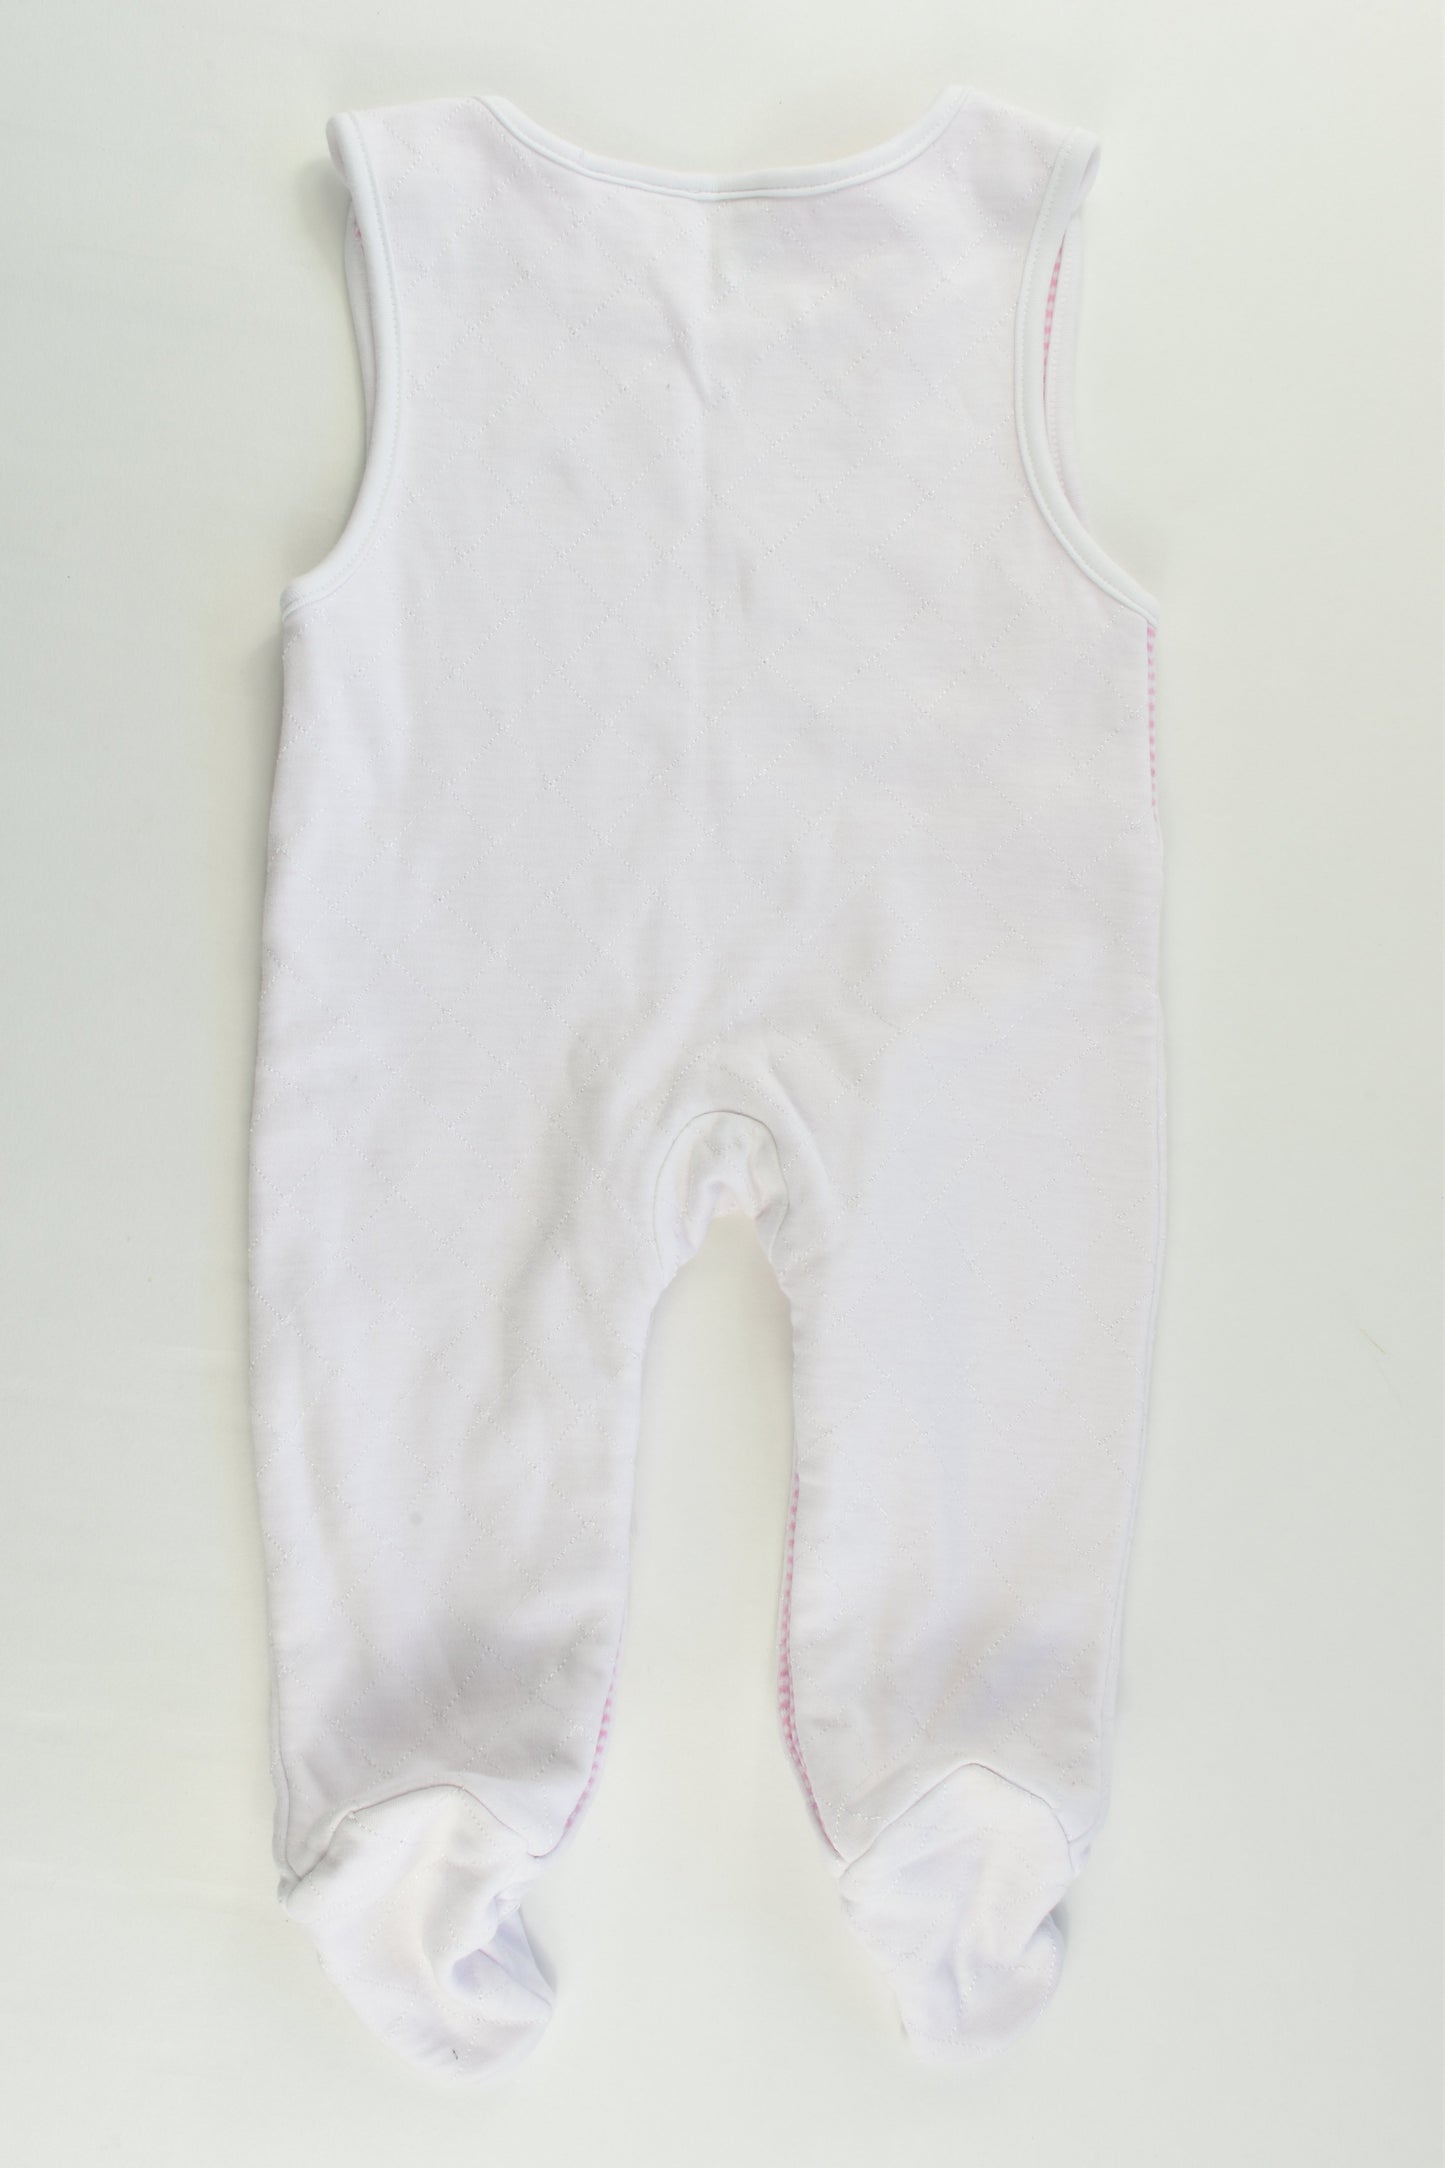 Esprit Size 00 (3-6 months) Lined Footed Elephant Overalls